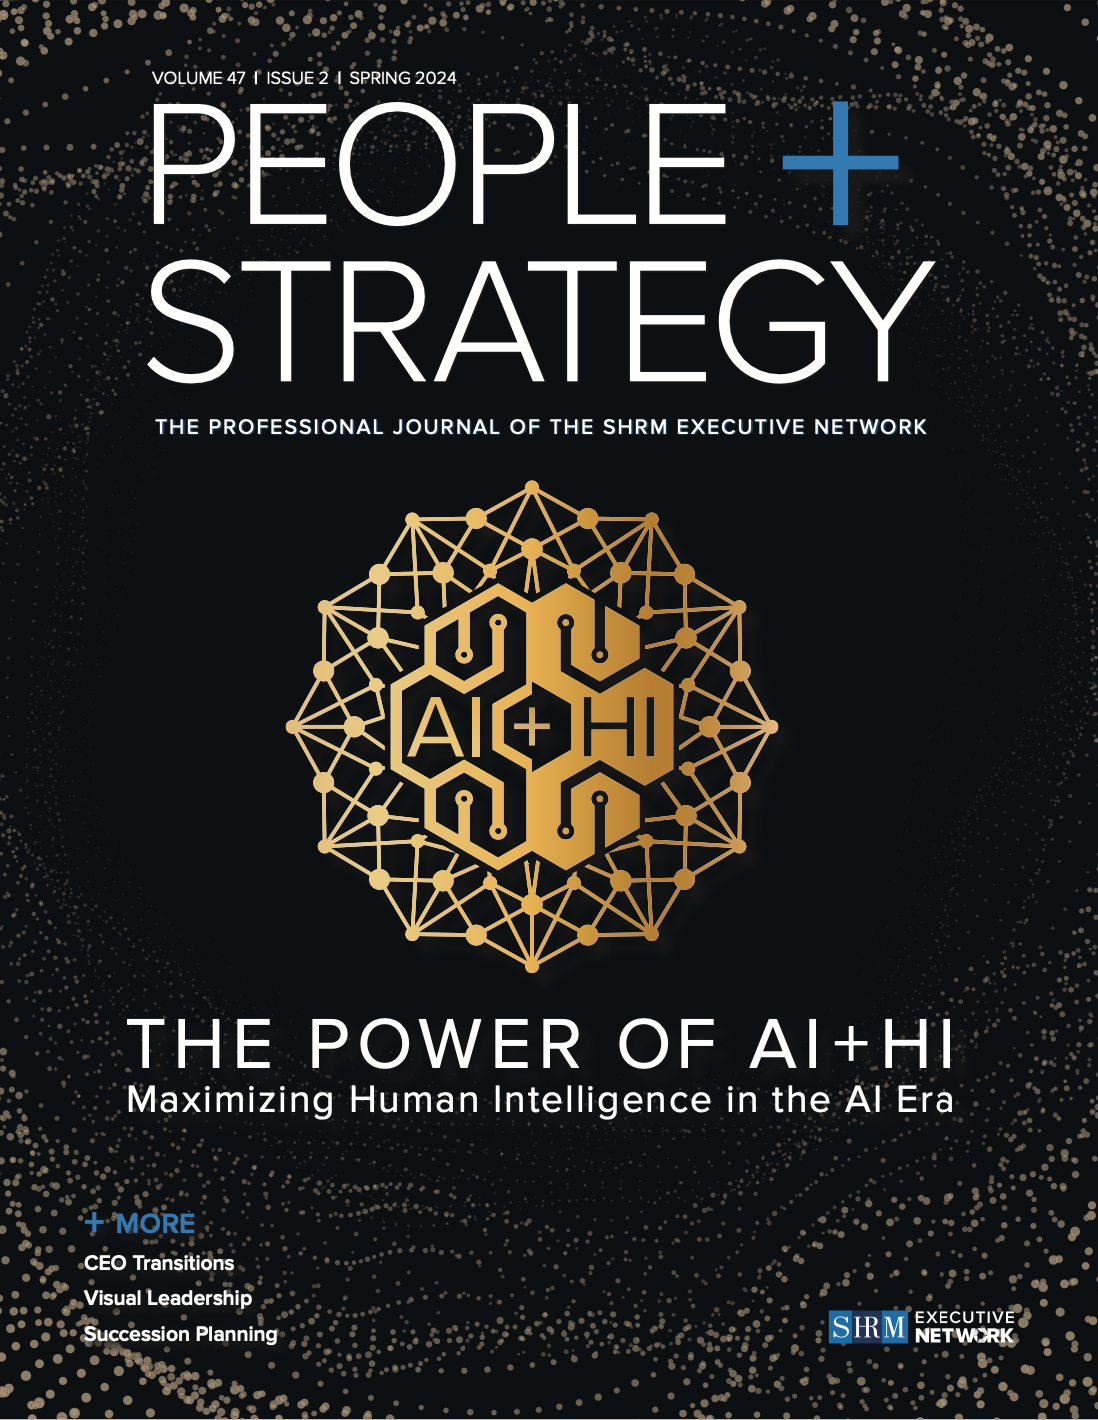 cover of the spring 2024 issue of People + Strategy journal